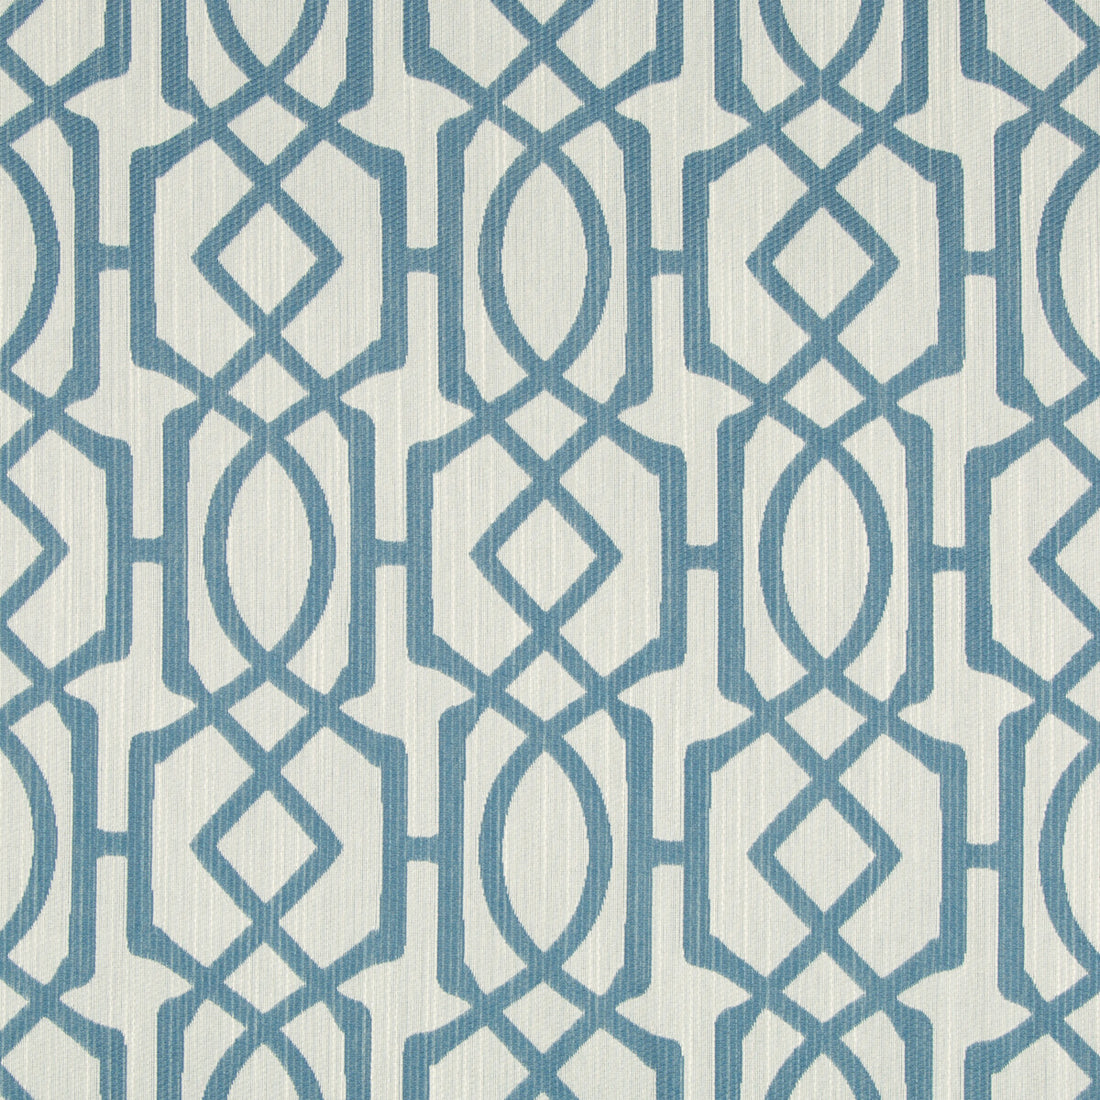 Kravet Design fabric in 34700-15 color - pattern 34700.15.0 - by Kravet Design in the Crypton Home collection